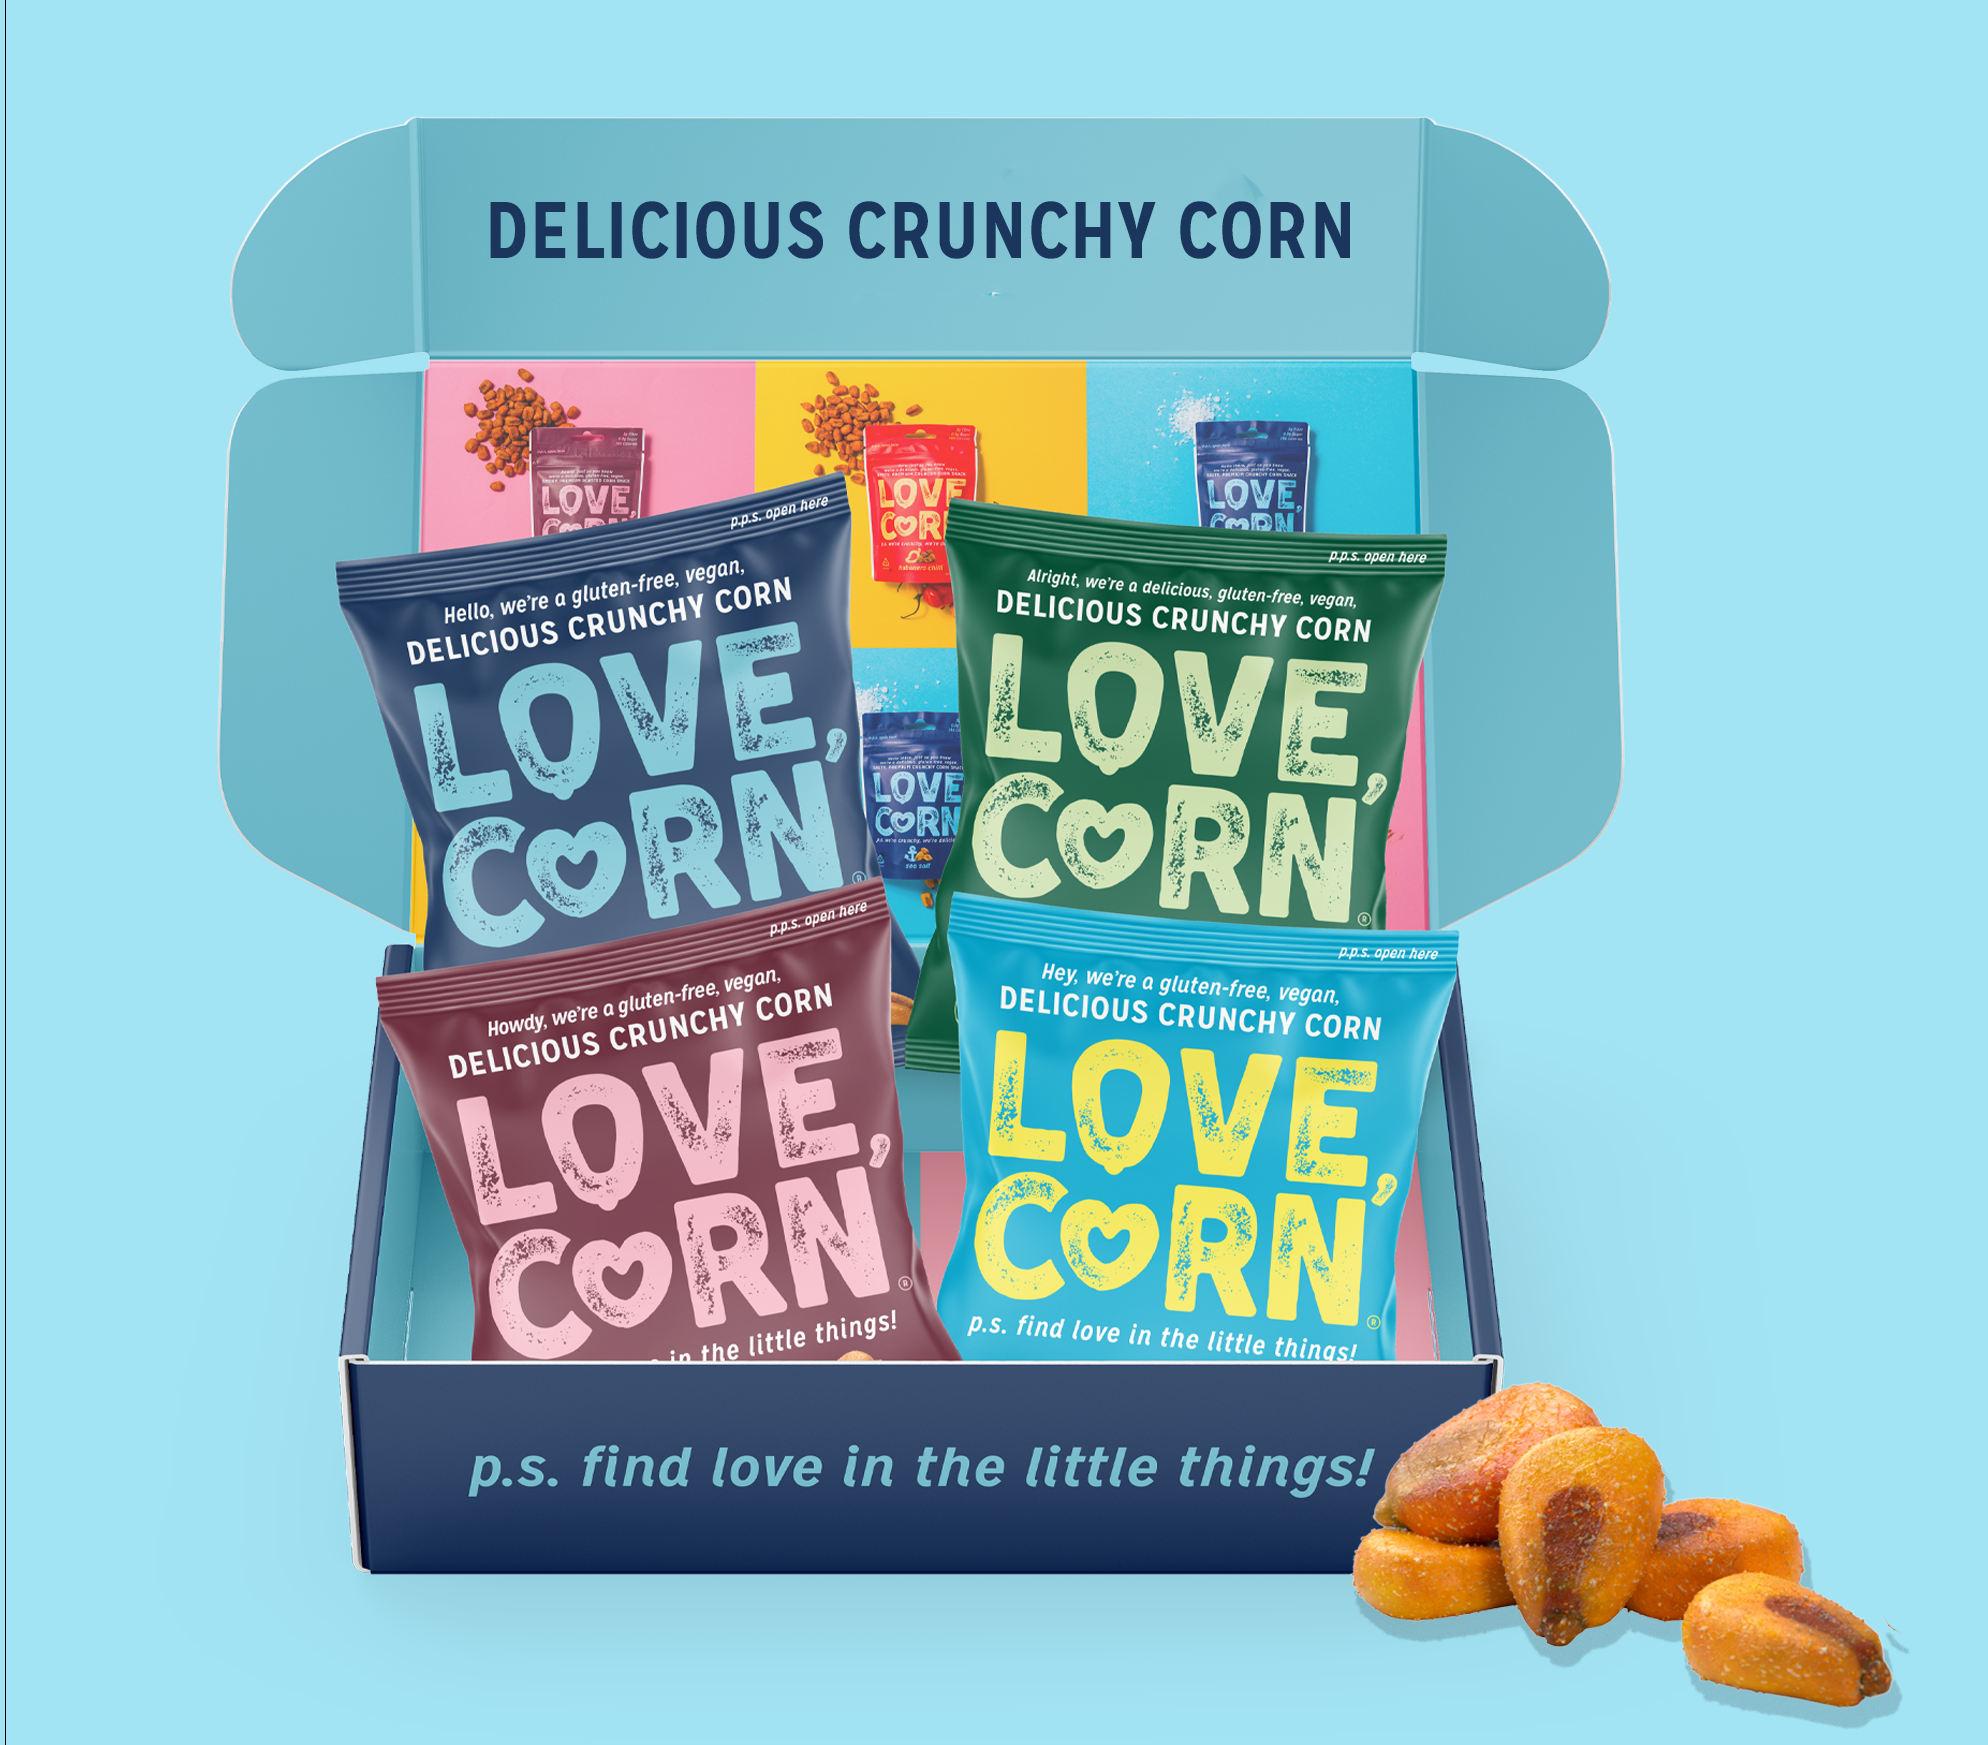 Love, Corn is the Vegan Snack for When You're On the Go